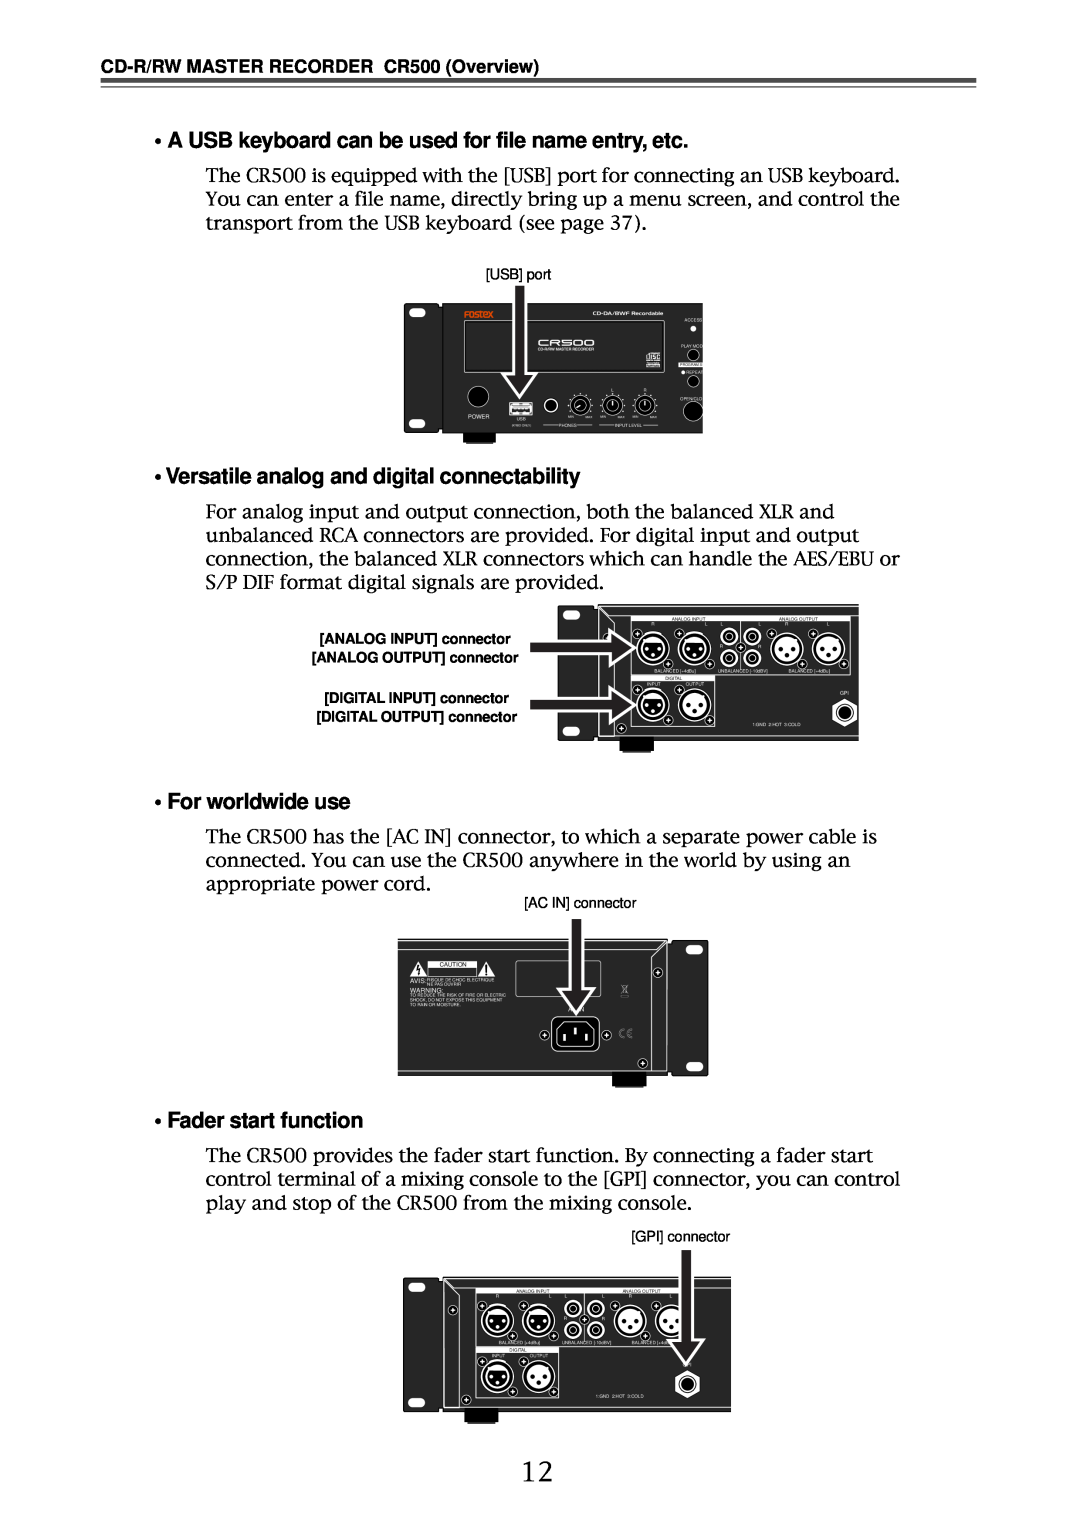 Fostex CR500 • Versatile analog and digital connectability, • For worldwide use, • Fader start function, USB port 